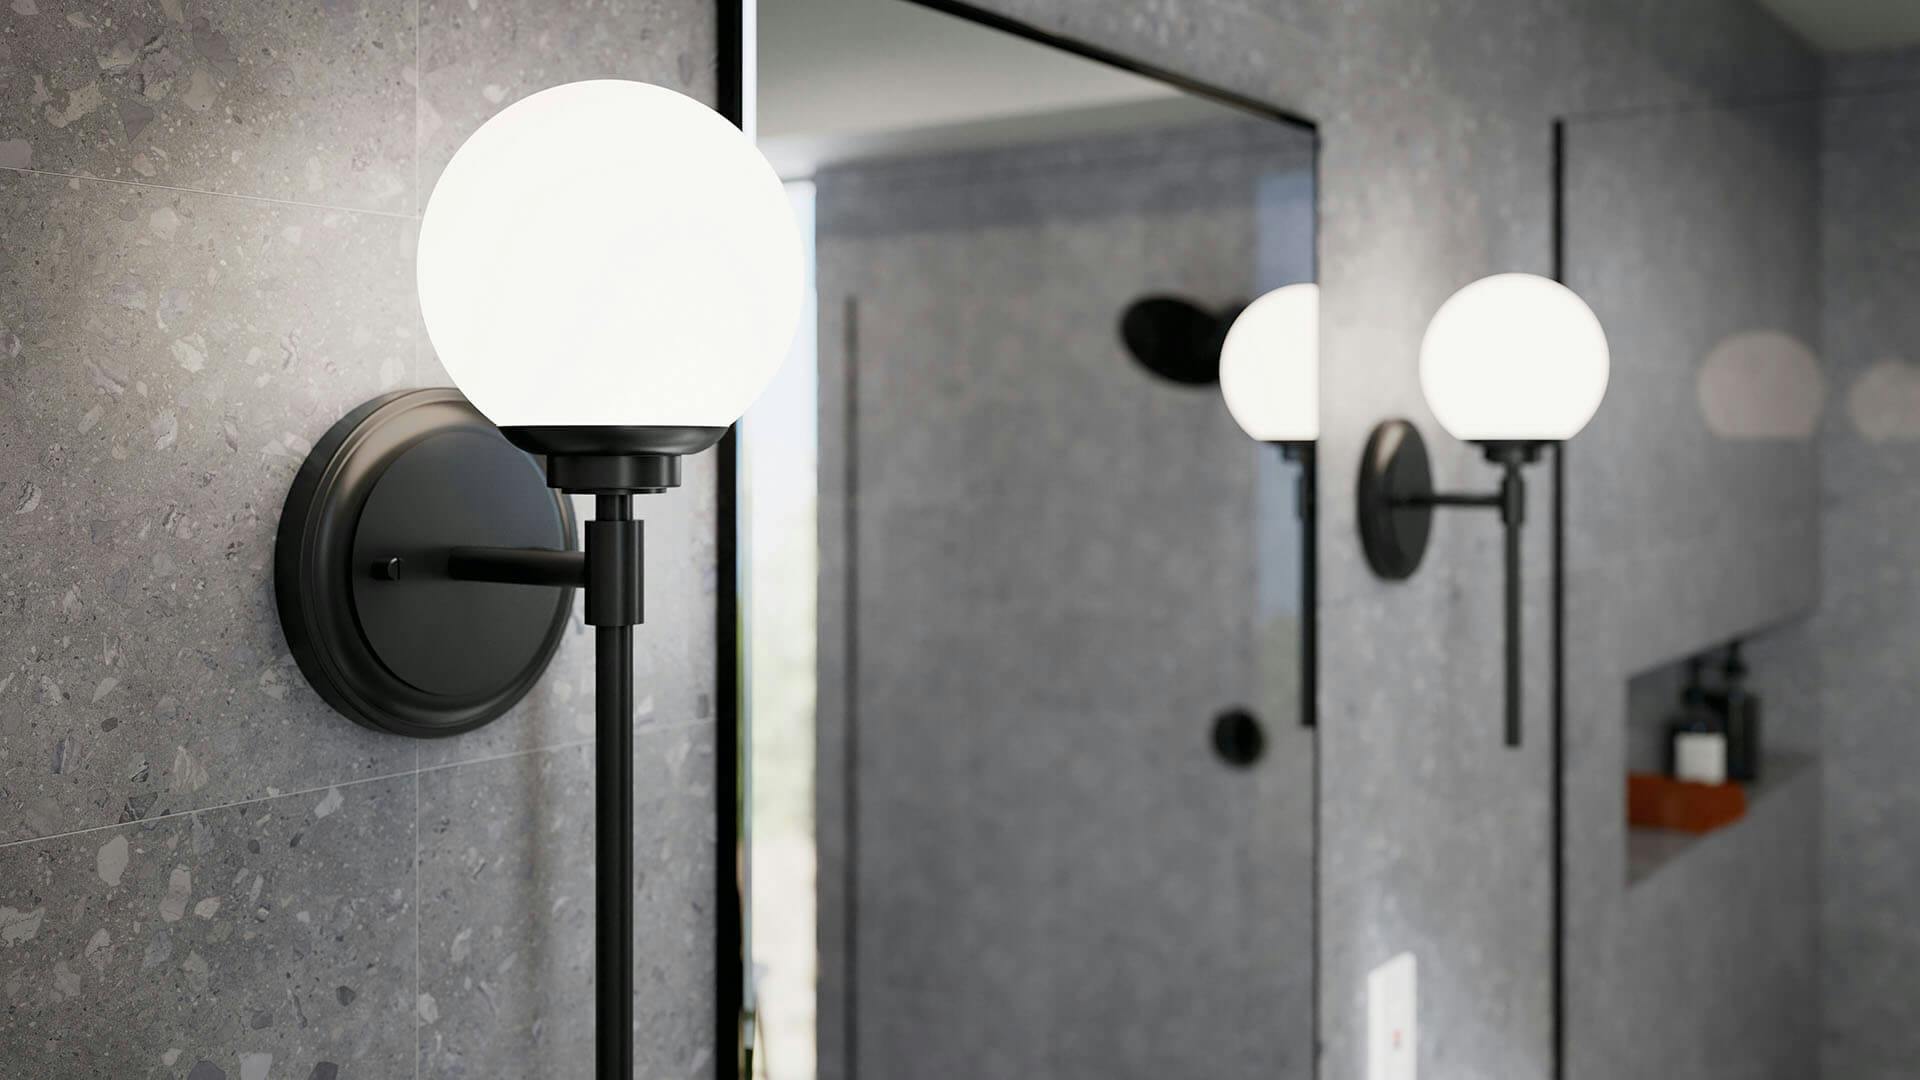 Two Benno sconces in black on either side of a rectangular mirror in a bathroom.